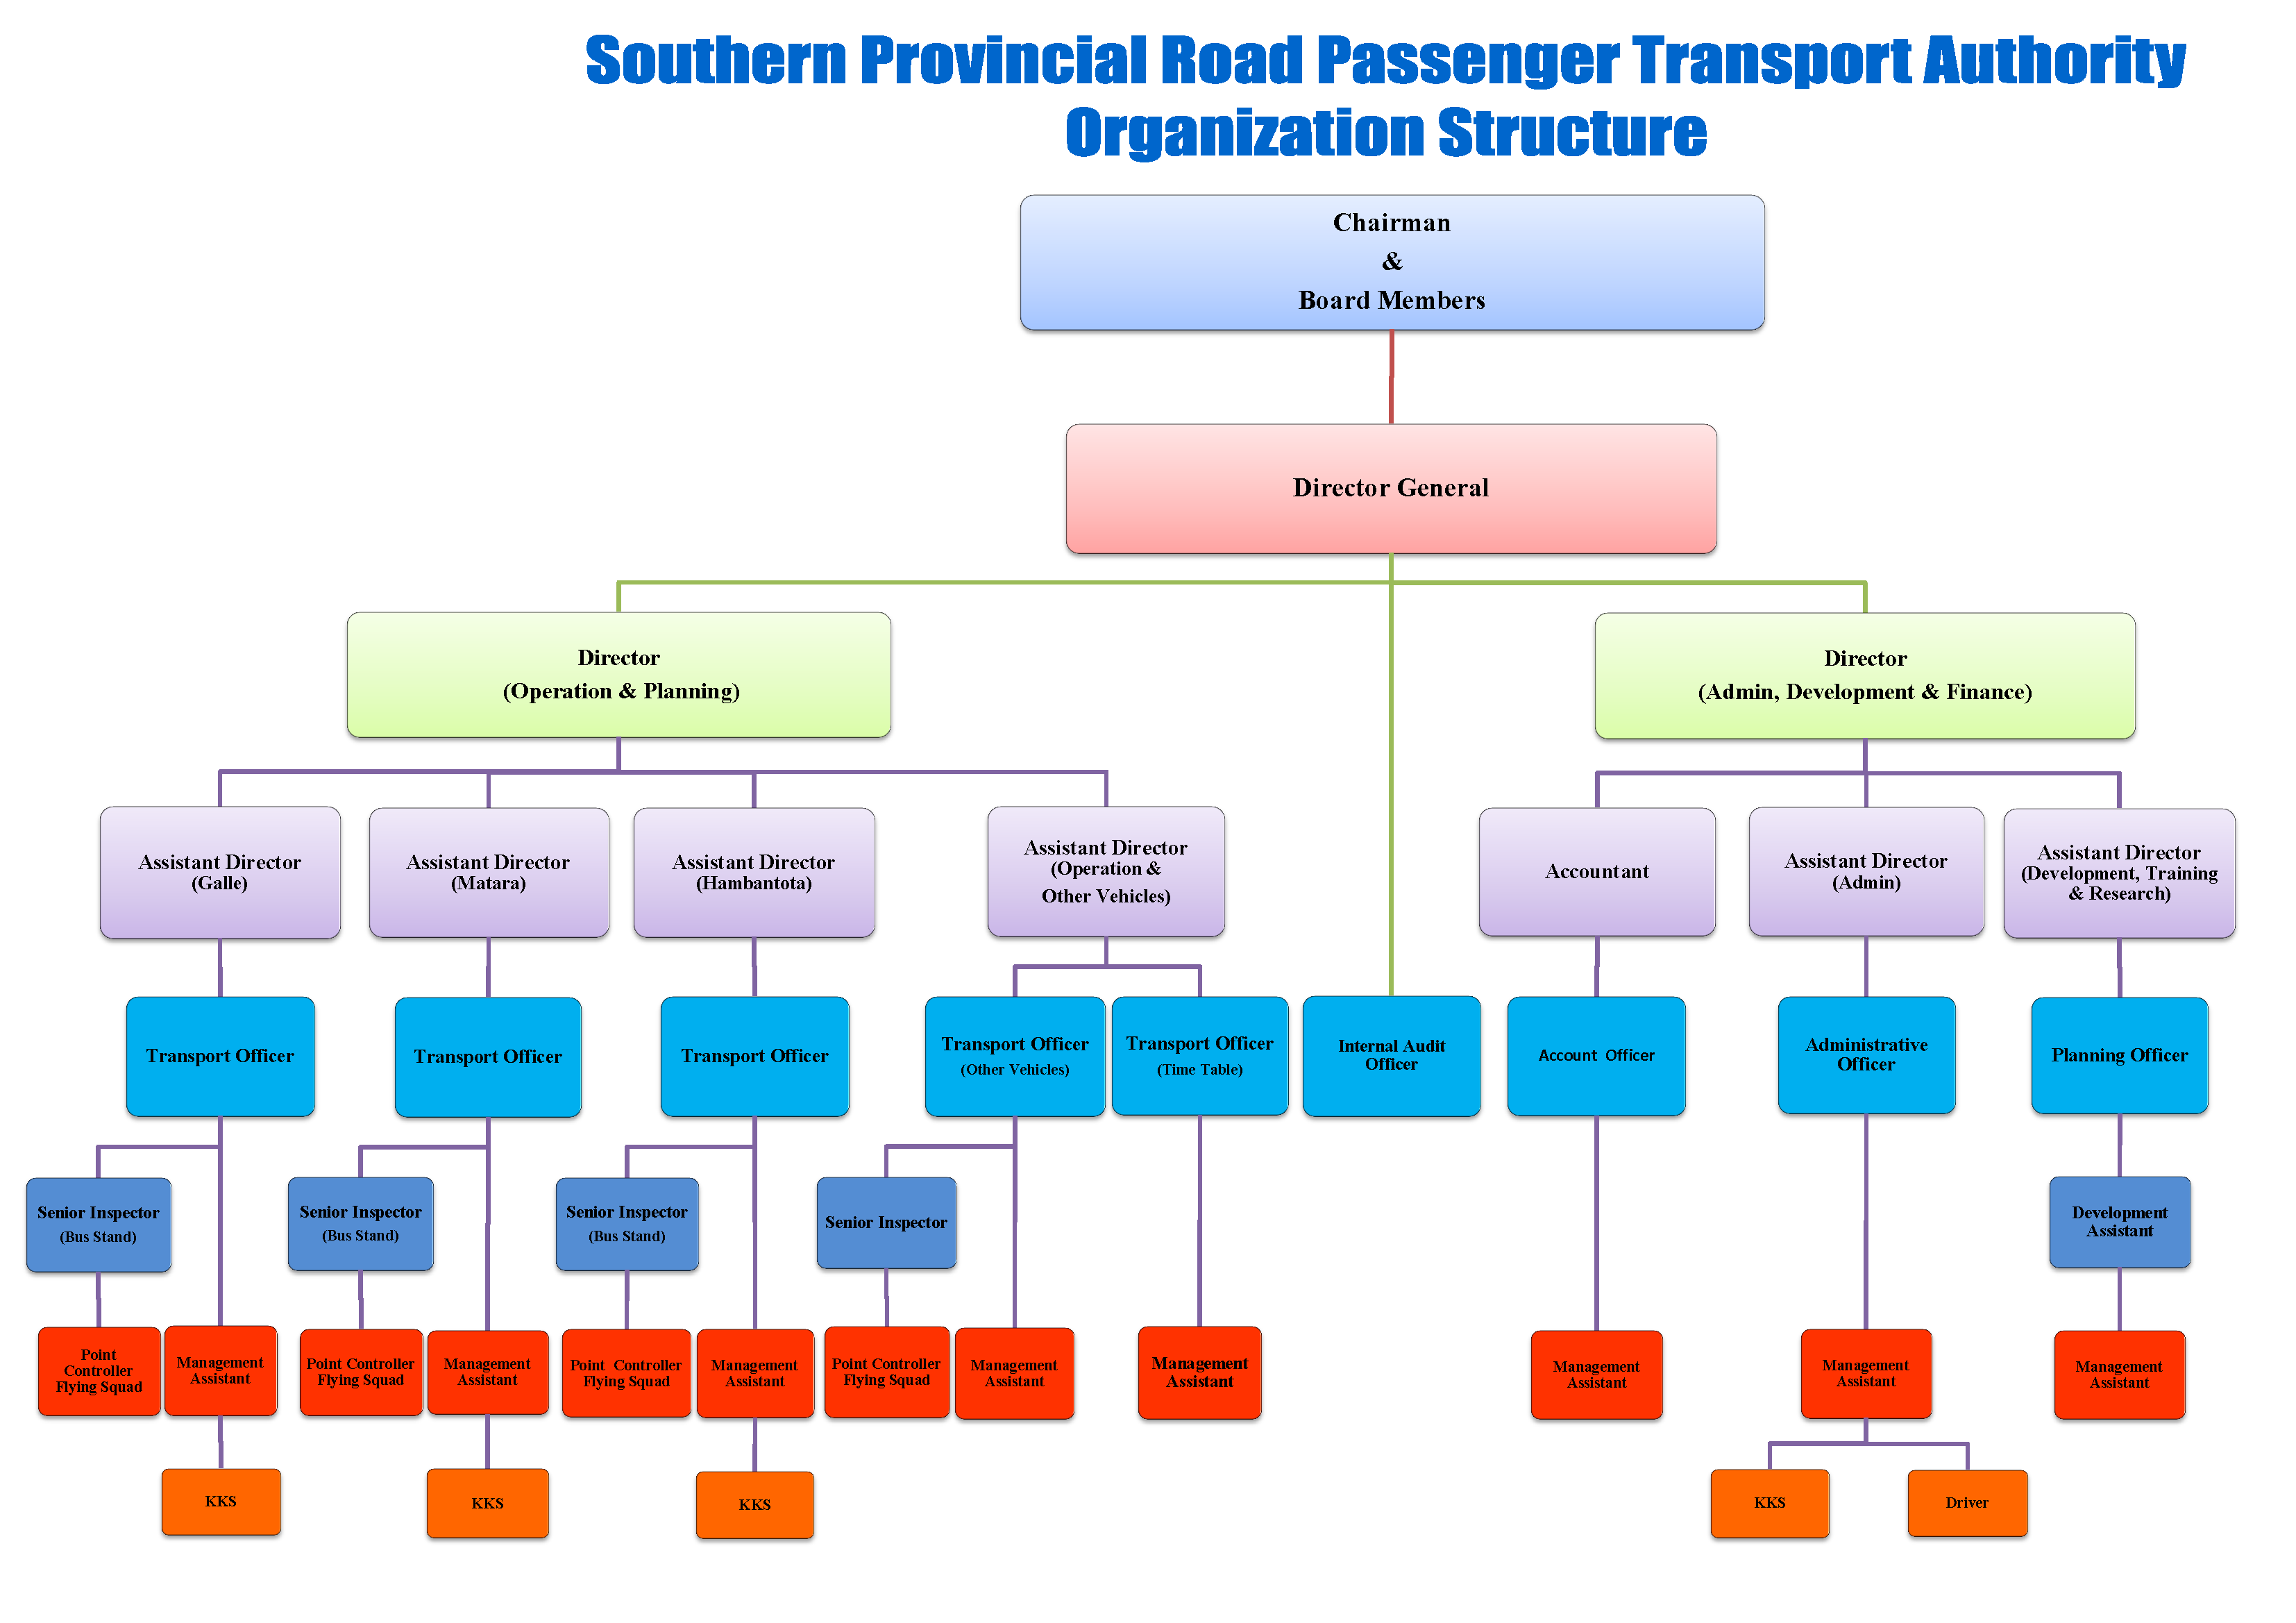 Organization Structure | Southern Provincial Road Passenger Transport ...